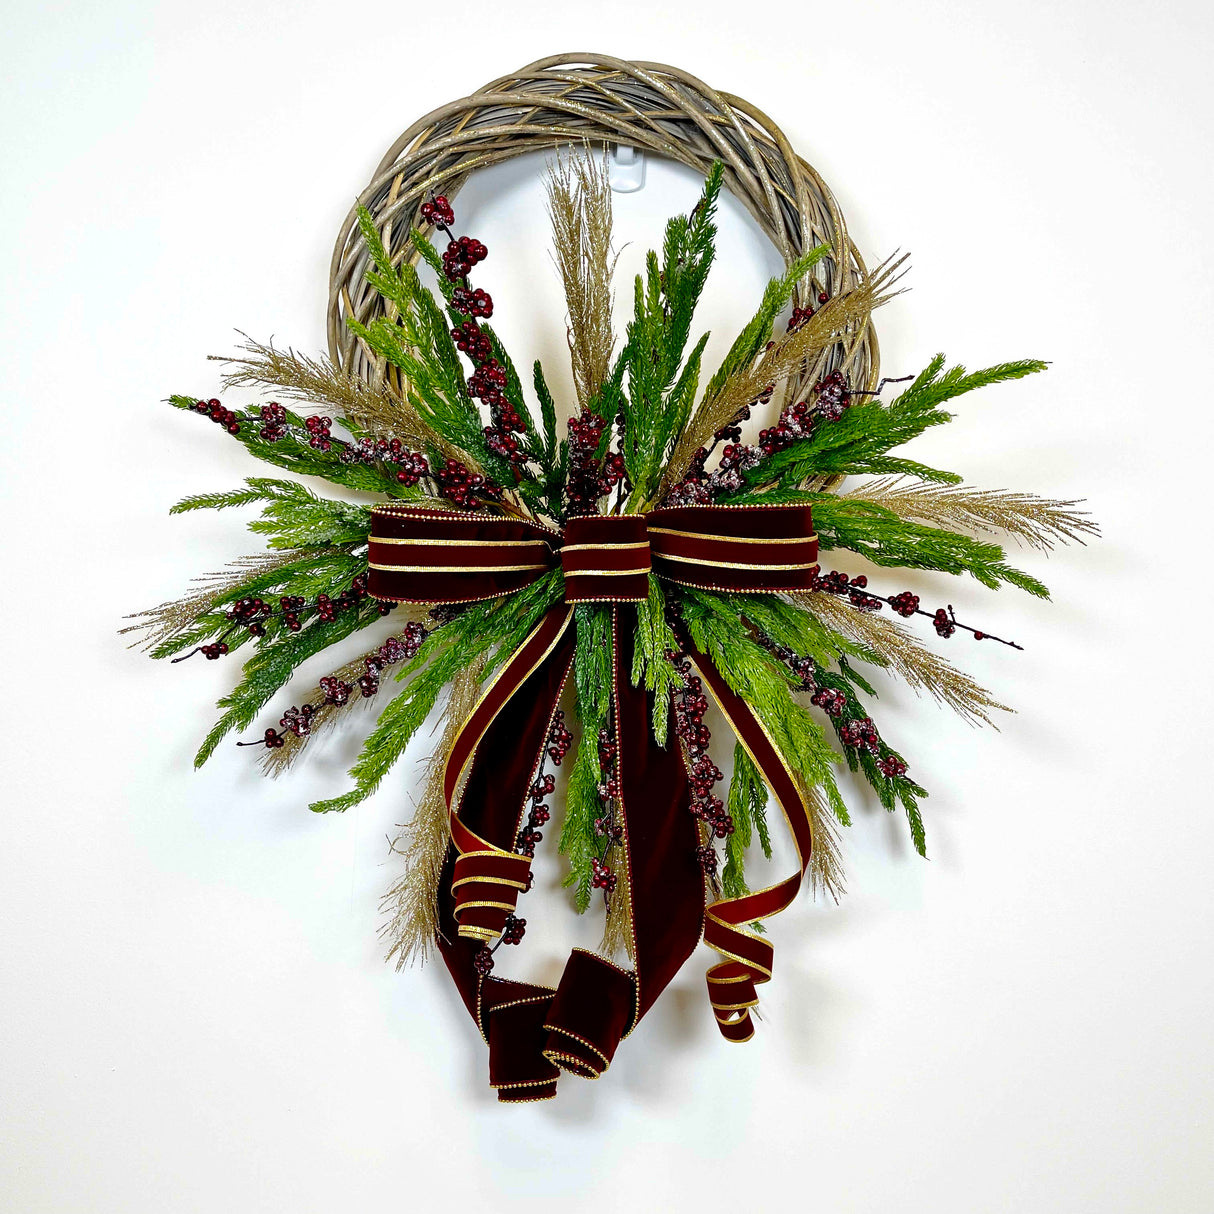 Burgundy Willow Wreath TUTORIAL ONLY